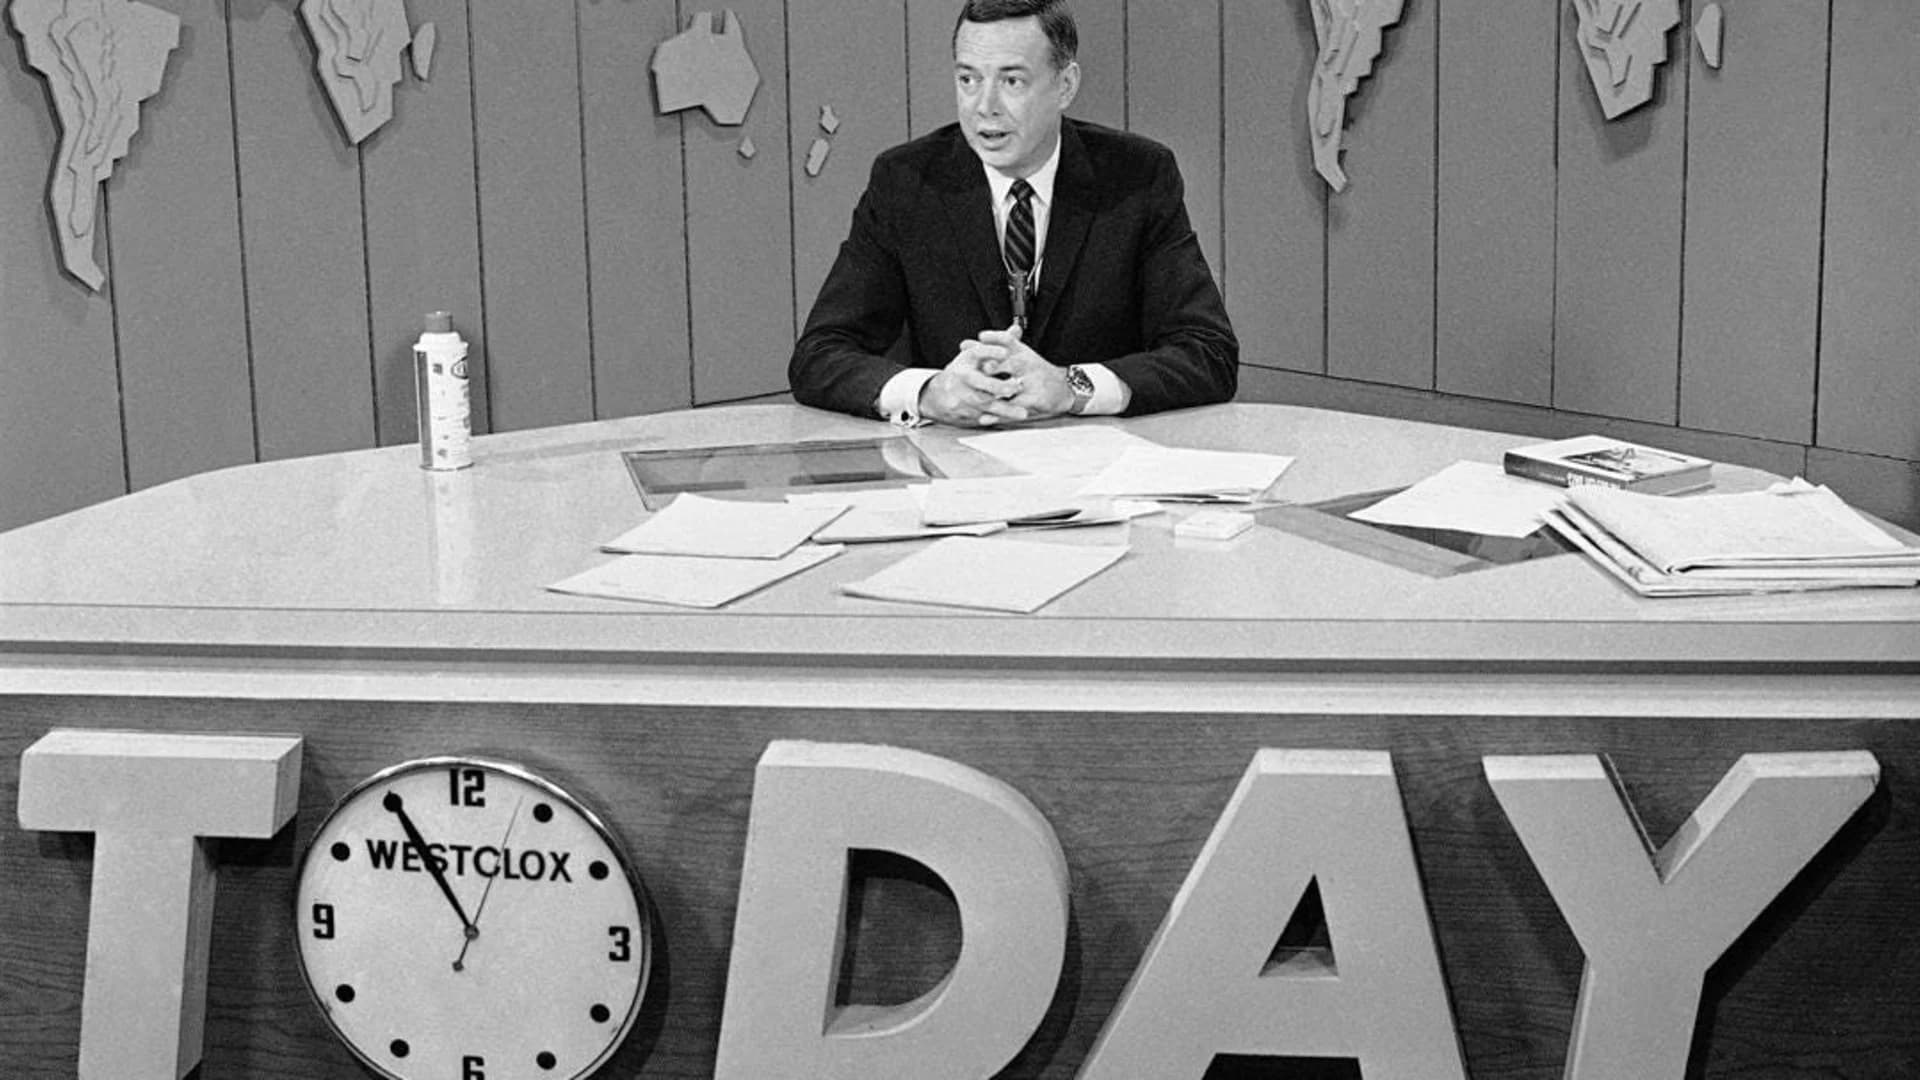 Hugh Downs, genial presence on TV news and game shows, dies at 99